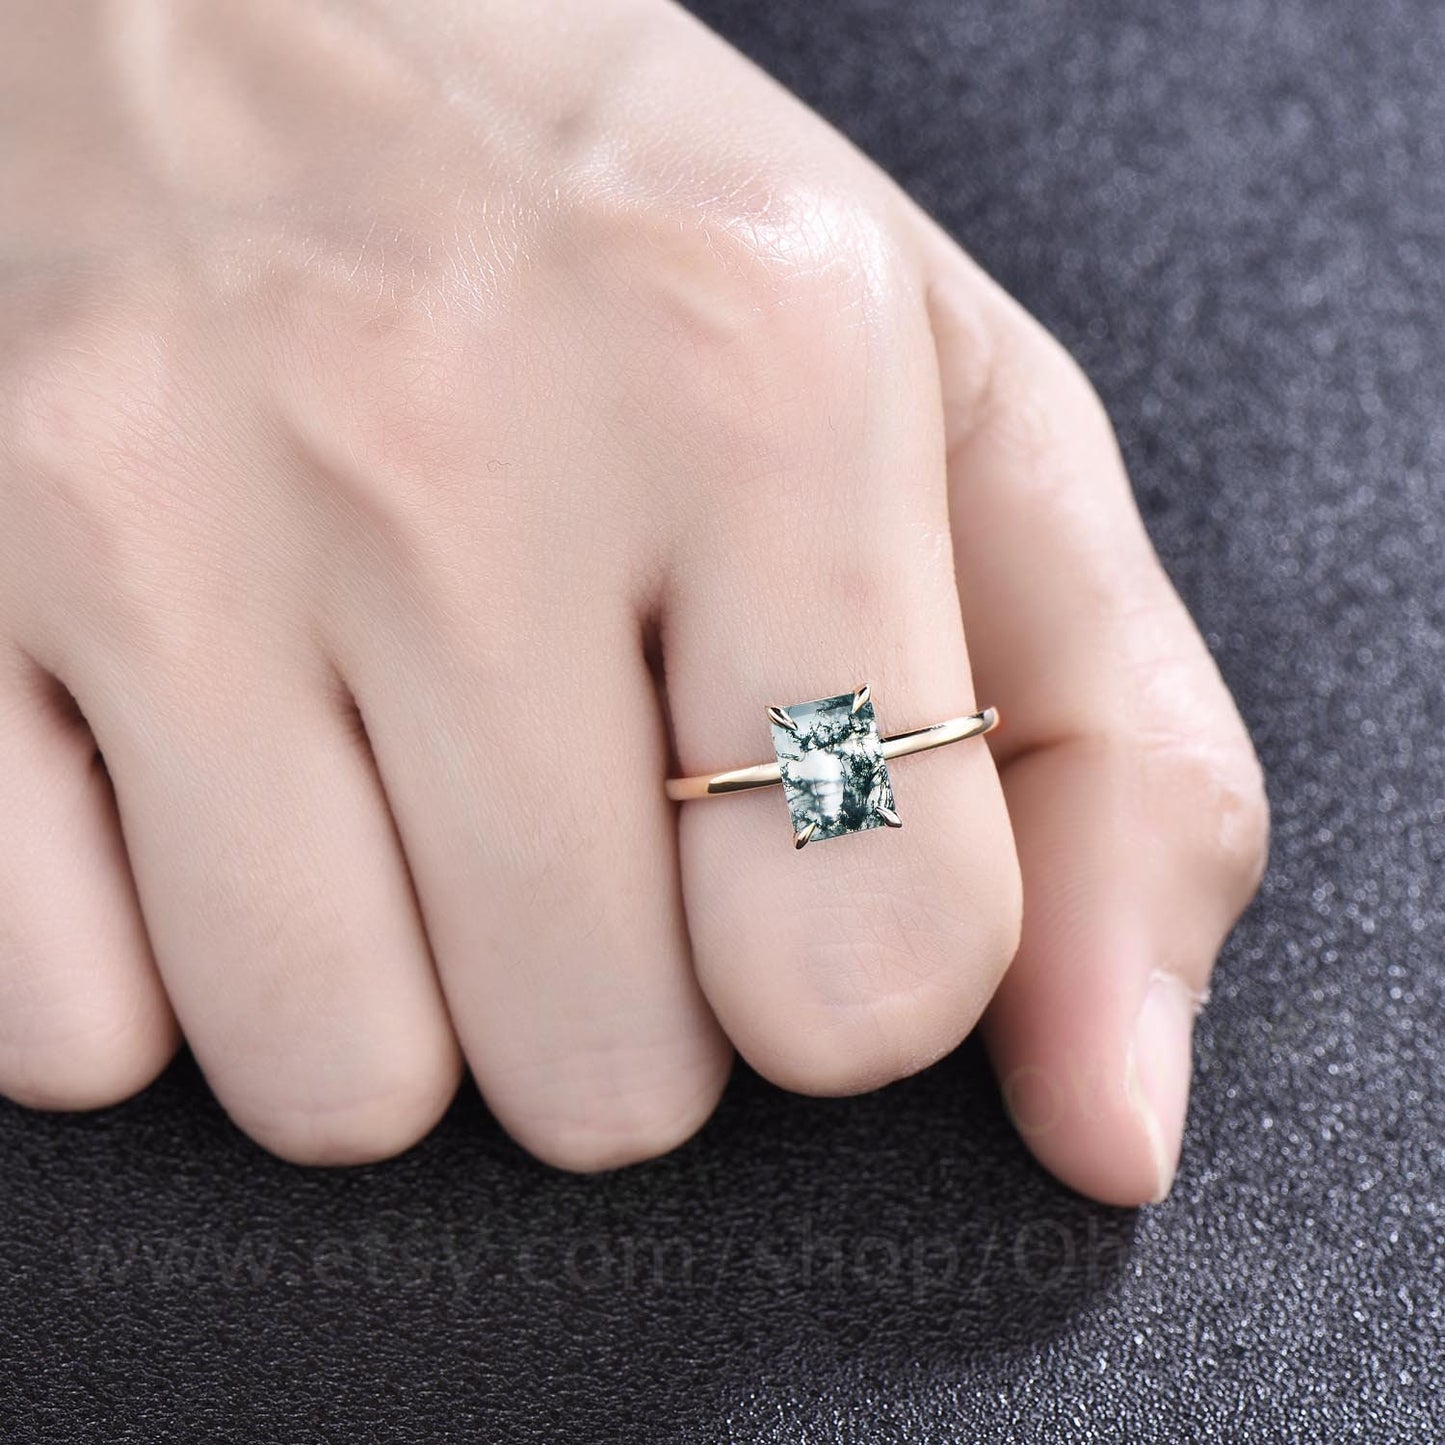 Green moss agate ring vintage dainty solitaire emerald cut moss agate engagement ring gold sterling silver for women Minimalist bridal ring